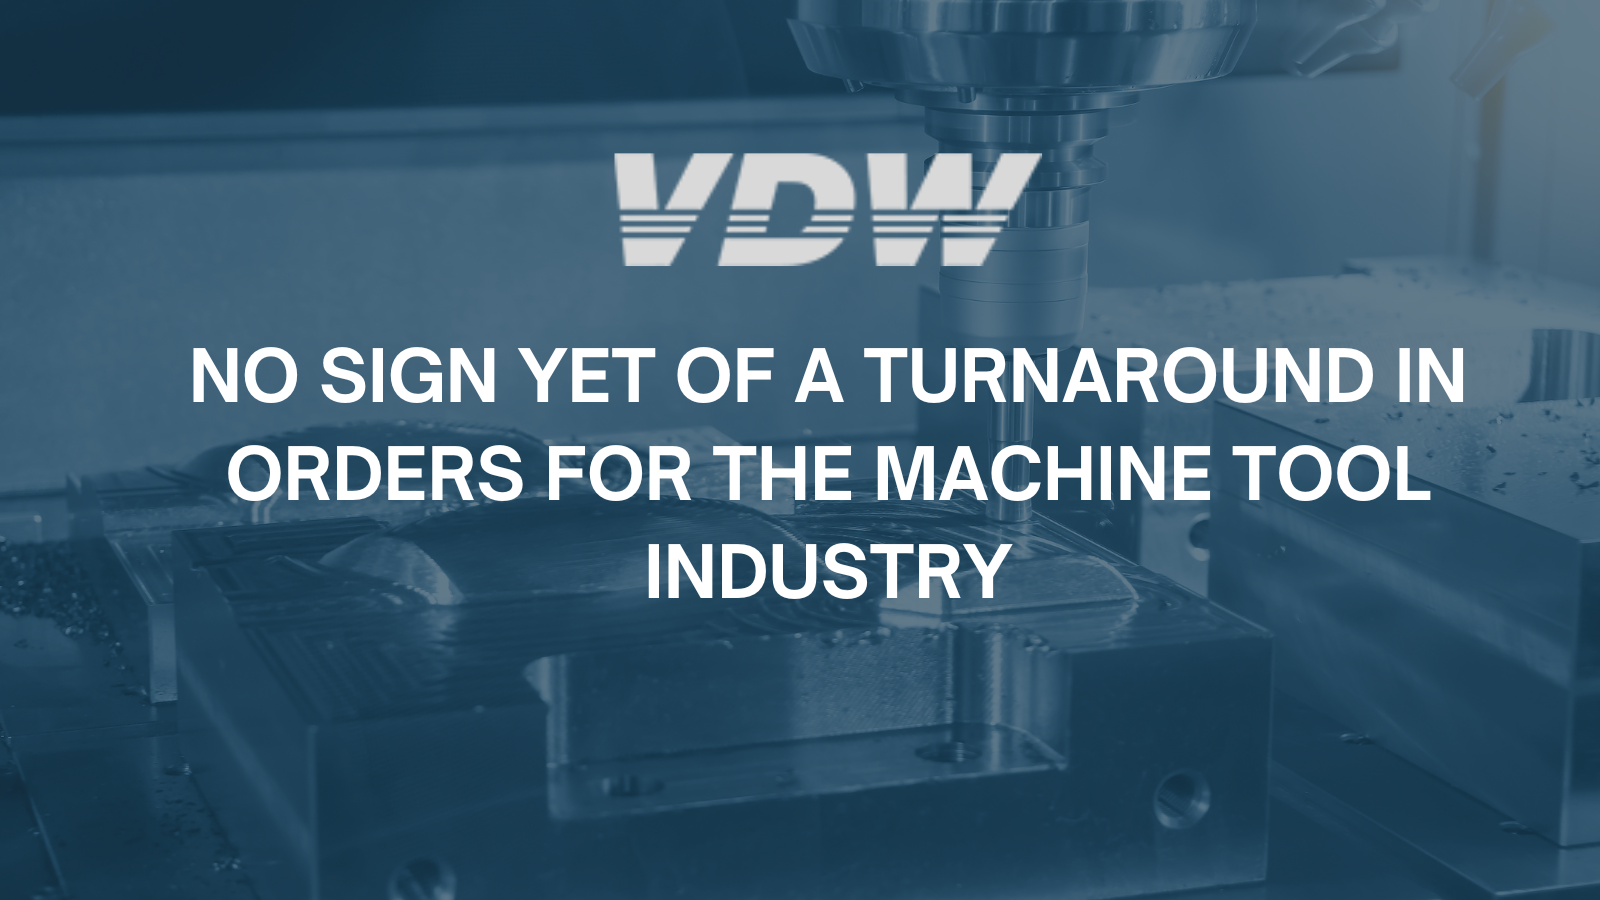 No sign yet of a turnaround in orders for the machine tool industry